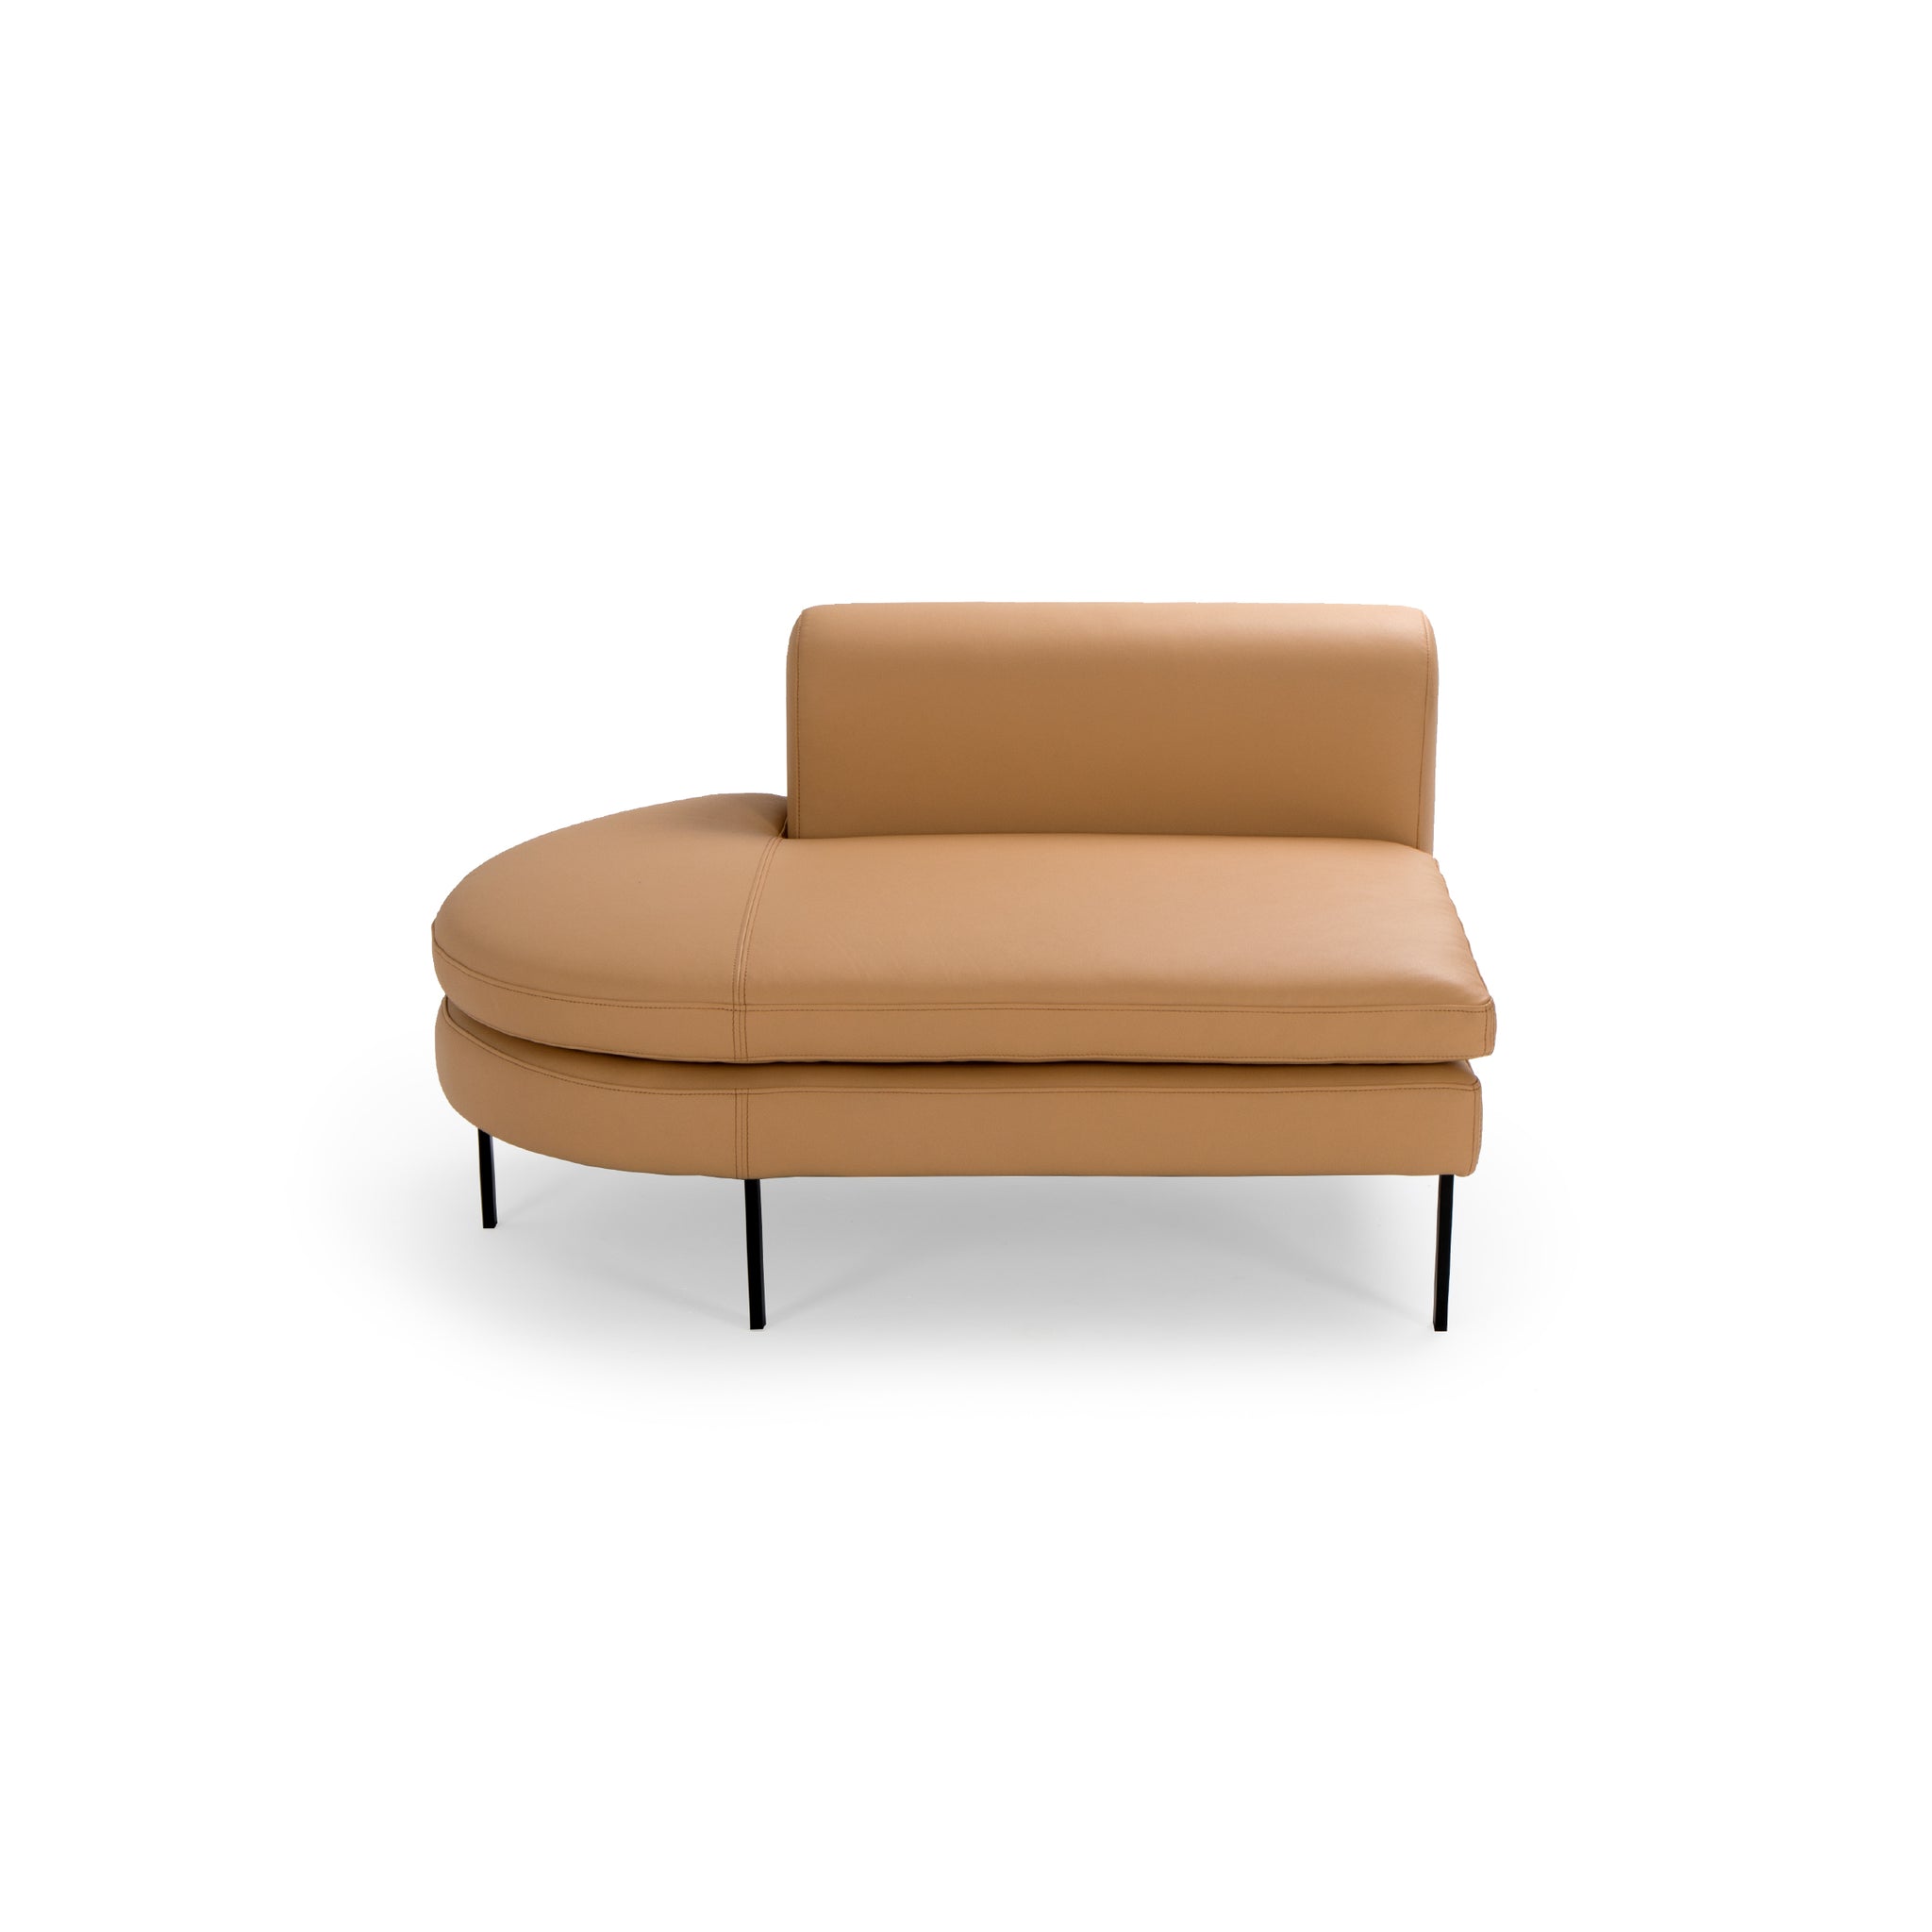 Archie 50" Leather Left Chaise